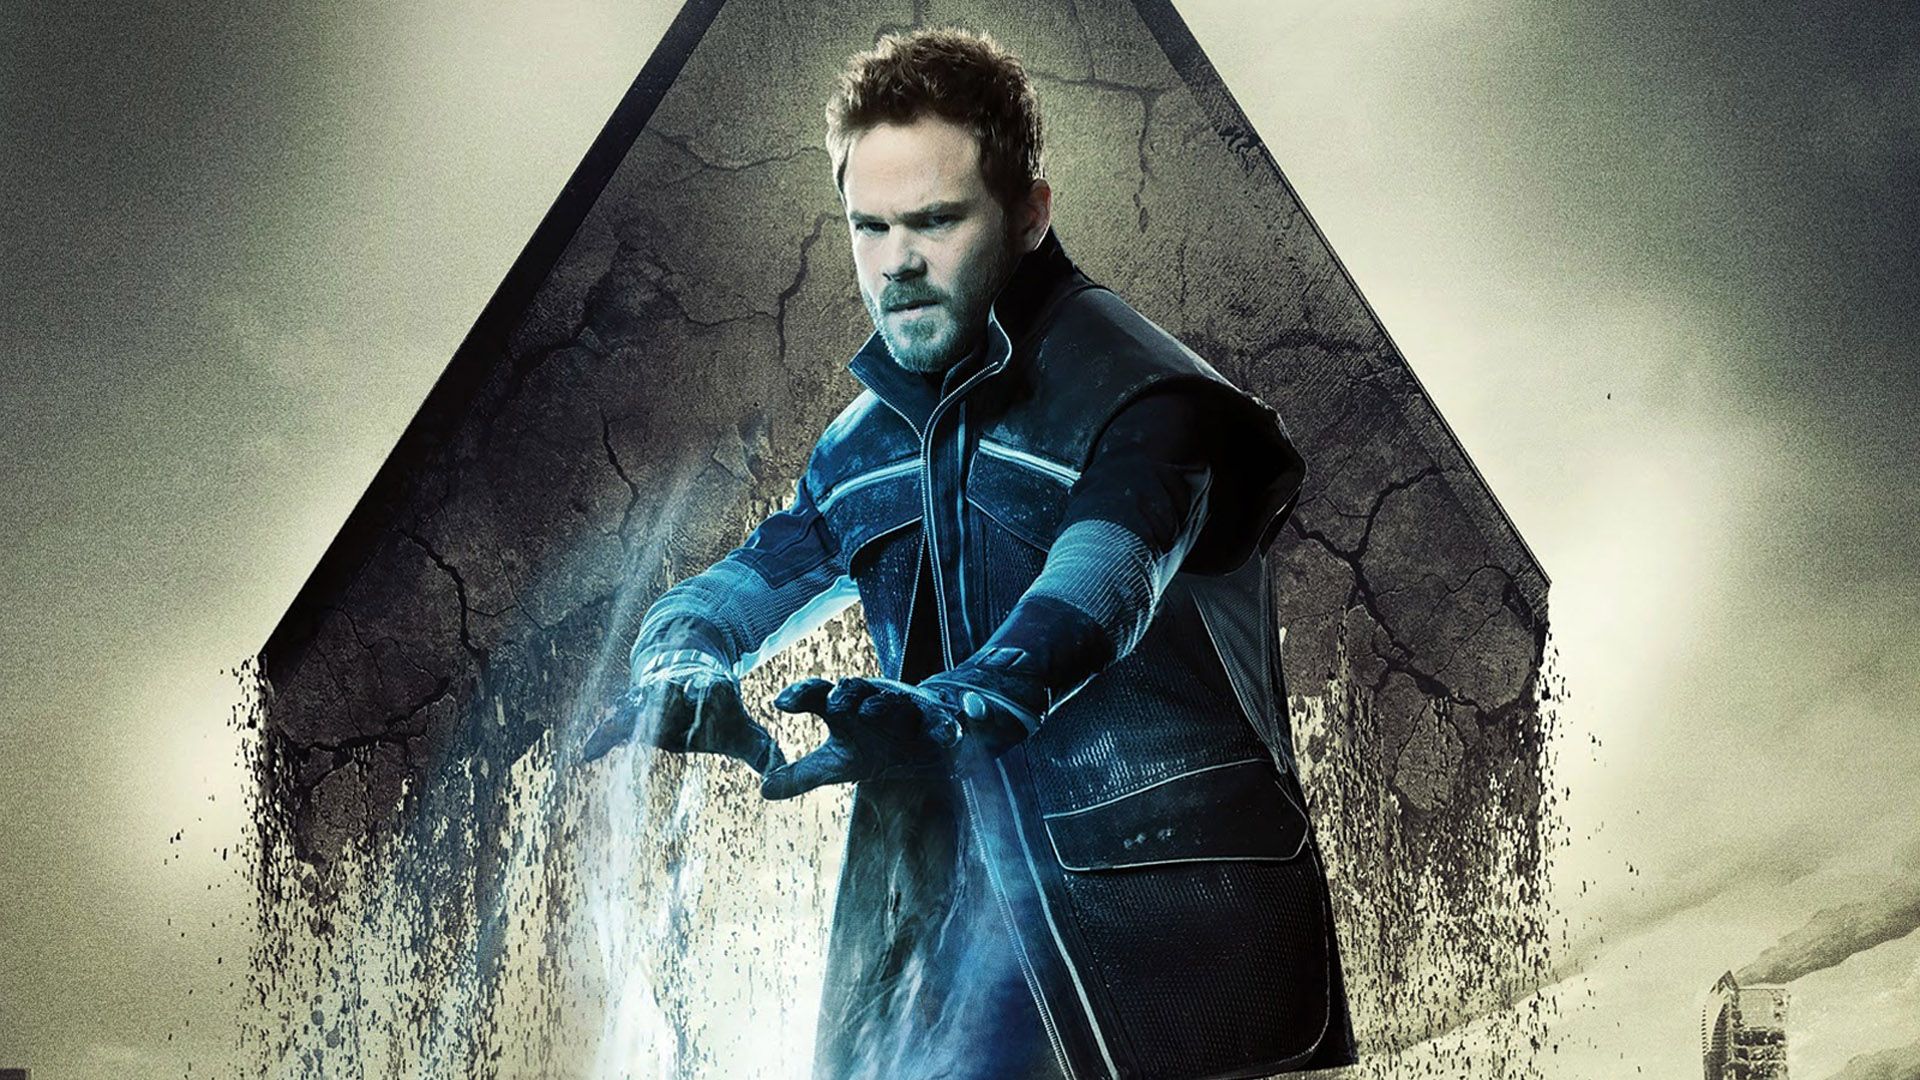 X Men Actor Eager To Play Iceman Again Since Superhero Came Out As Gay